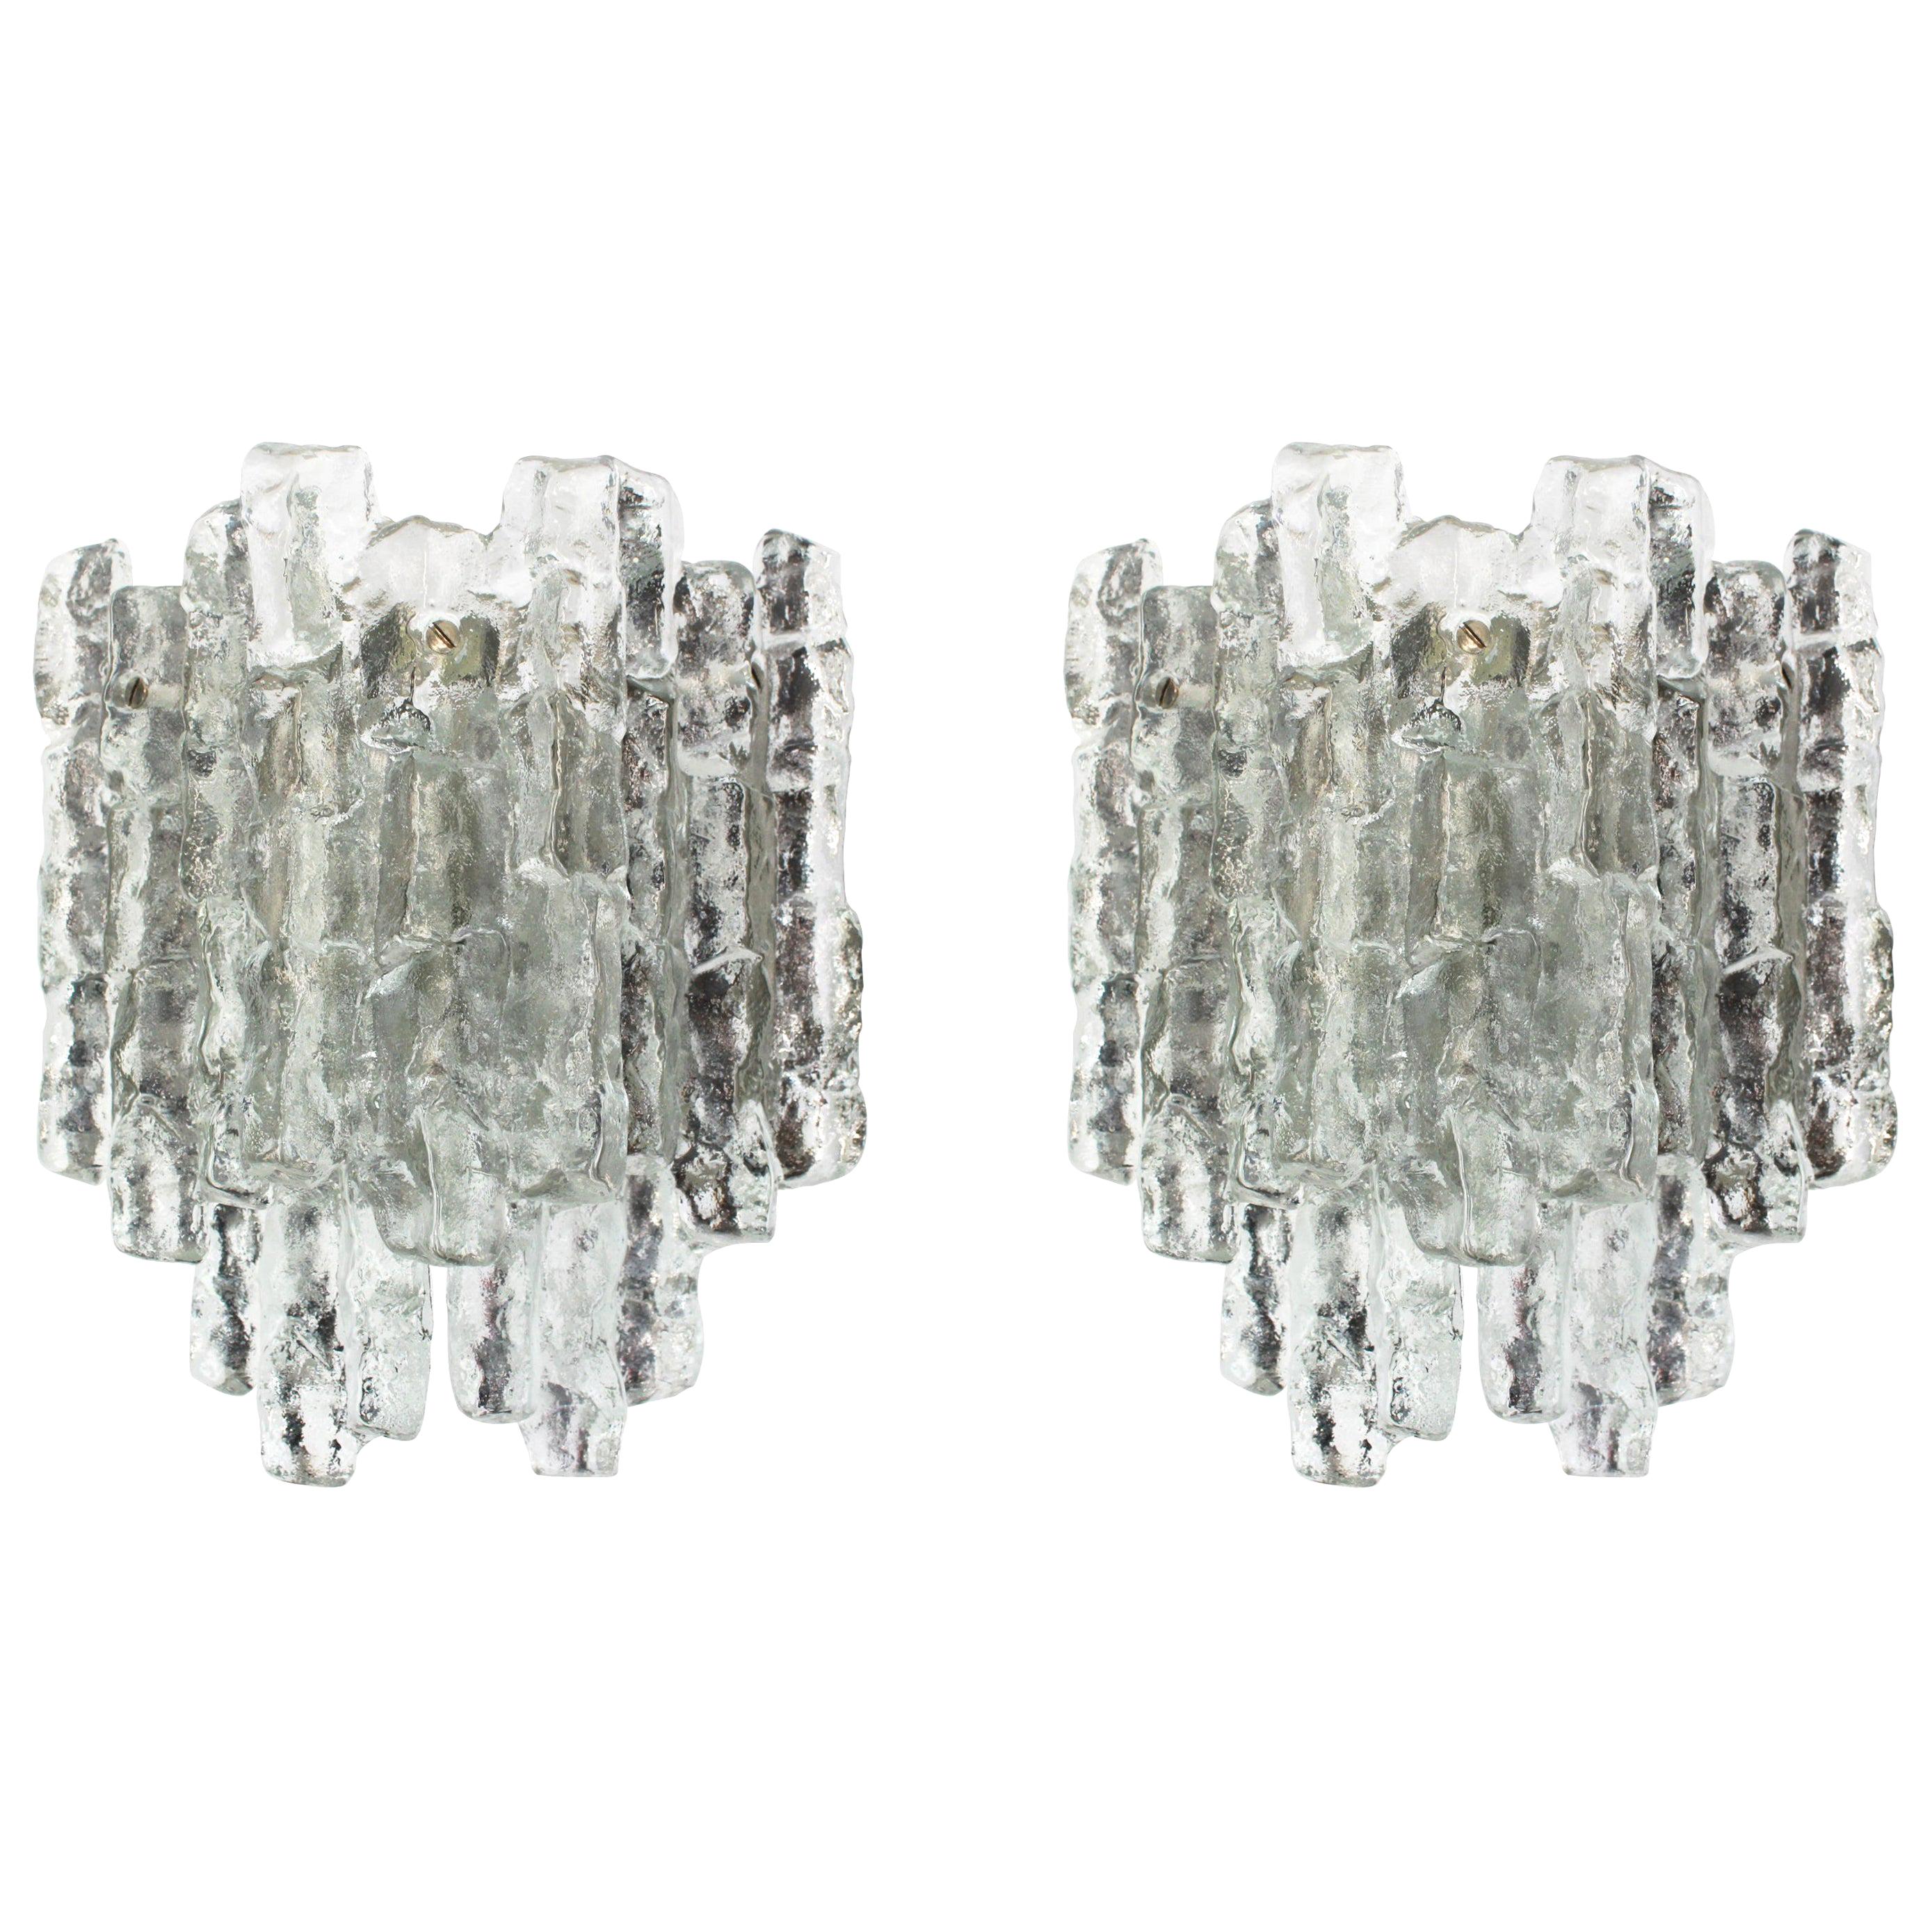 Pair of Large Kalmar Sconces Murano Wall Lights, Austria, 1960s For Sale